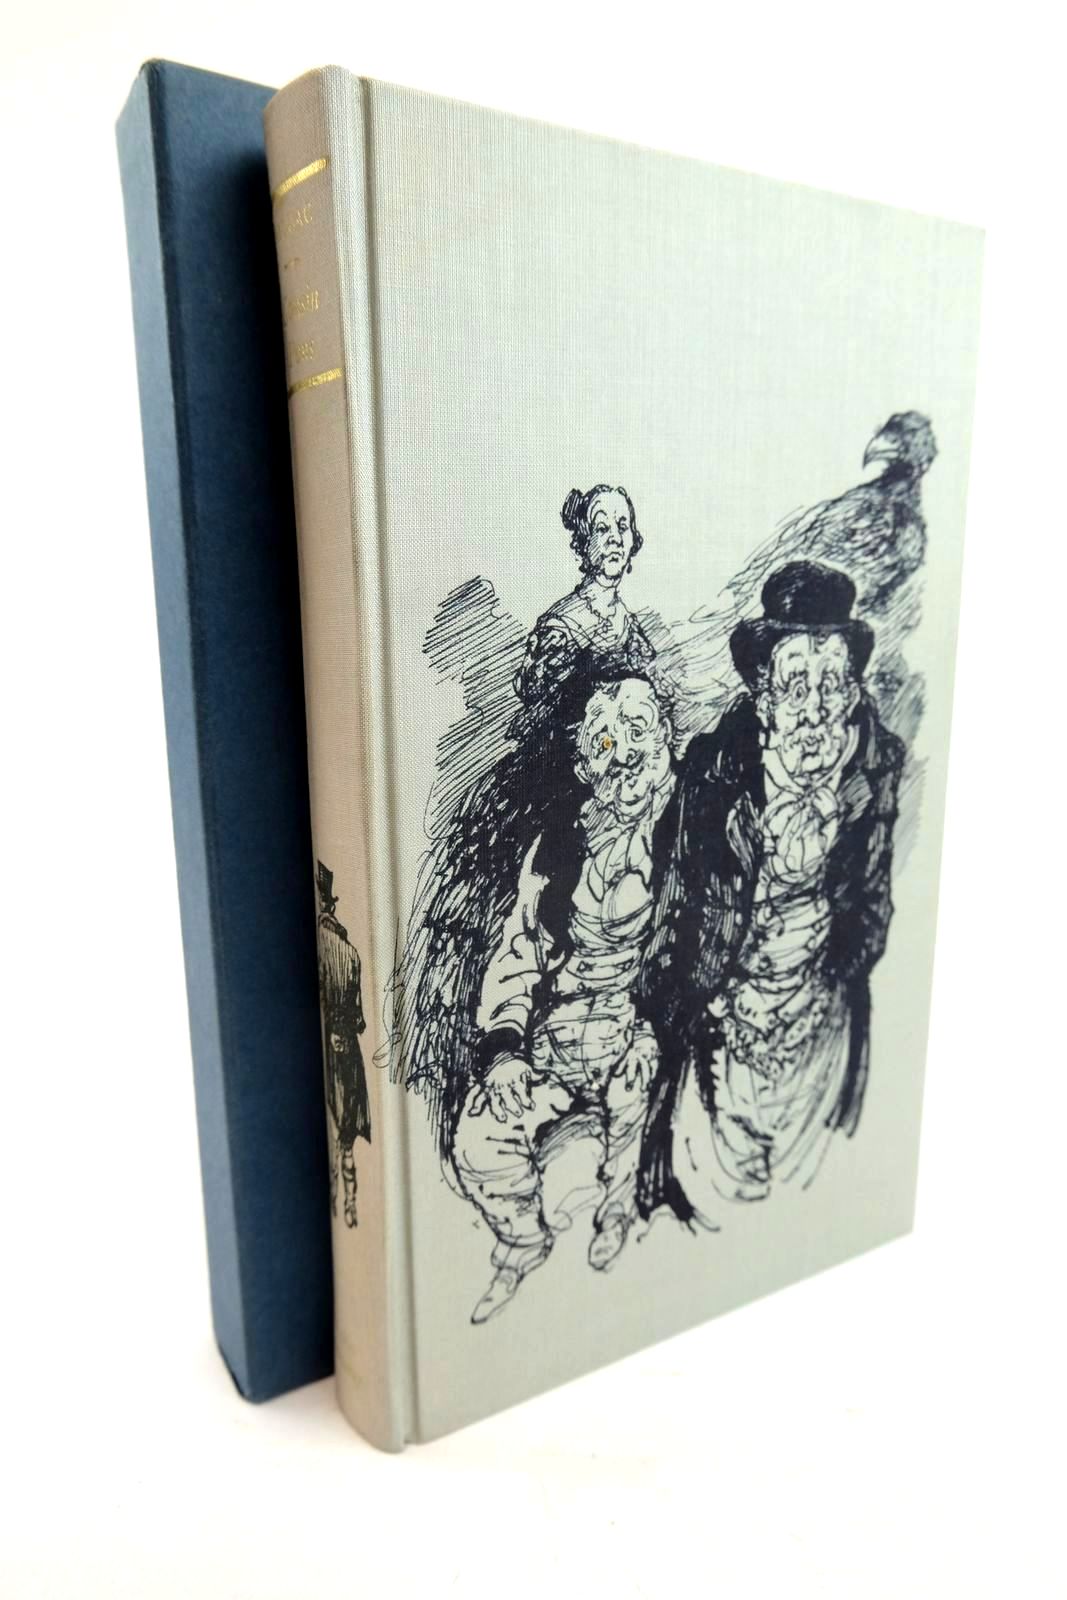 Photo of COUSIN PONS written by De Balzac, Honore Hunt, Herbert J. illustrated by Hughes, Shirley published by Folio Society (STOCK CODE: 1319877)  for sale by Stella & Rose's Books